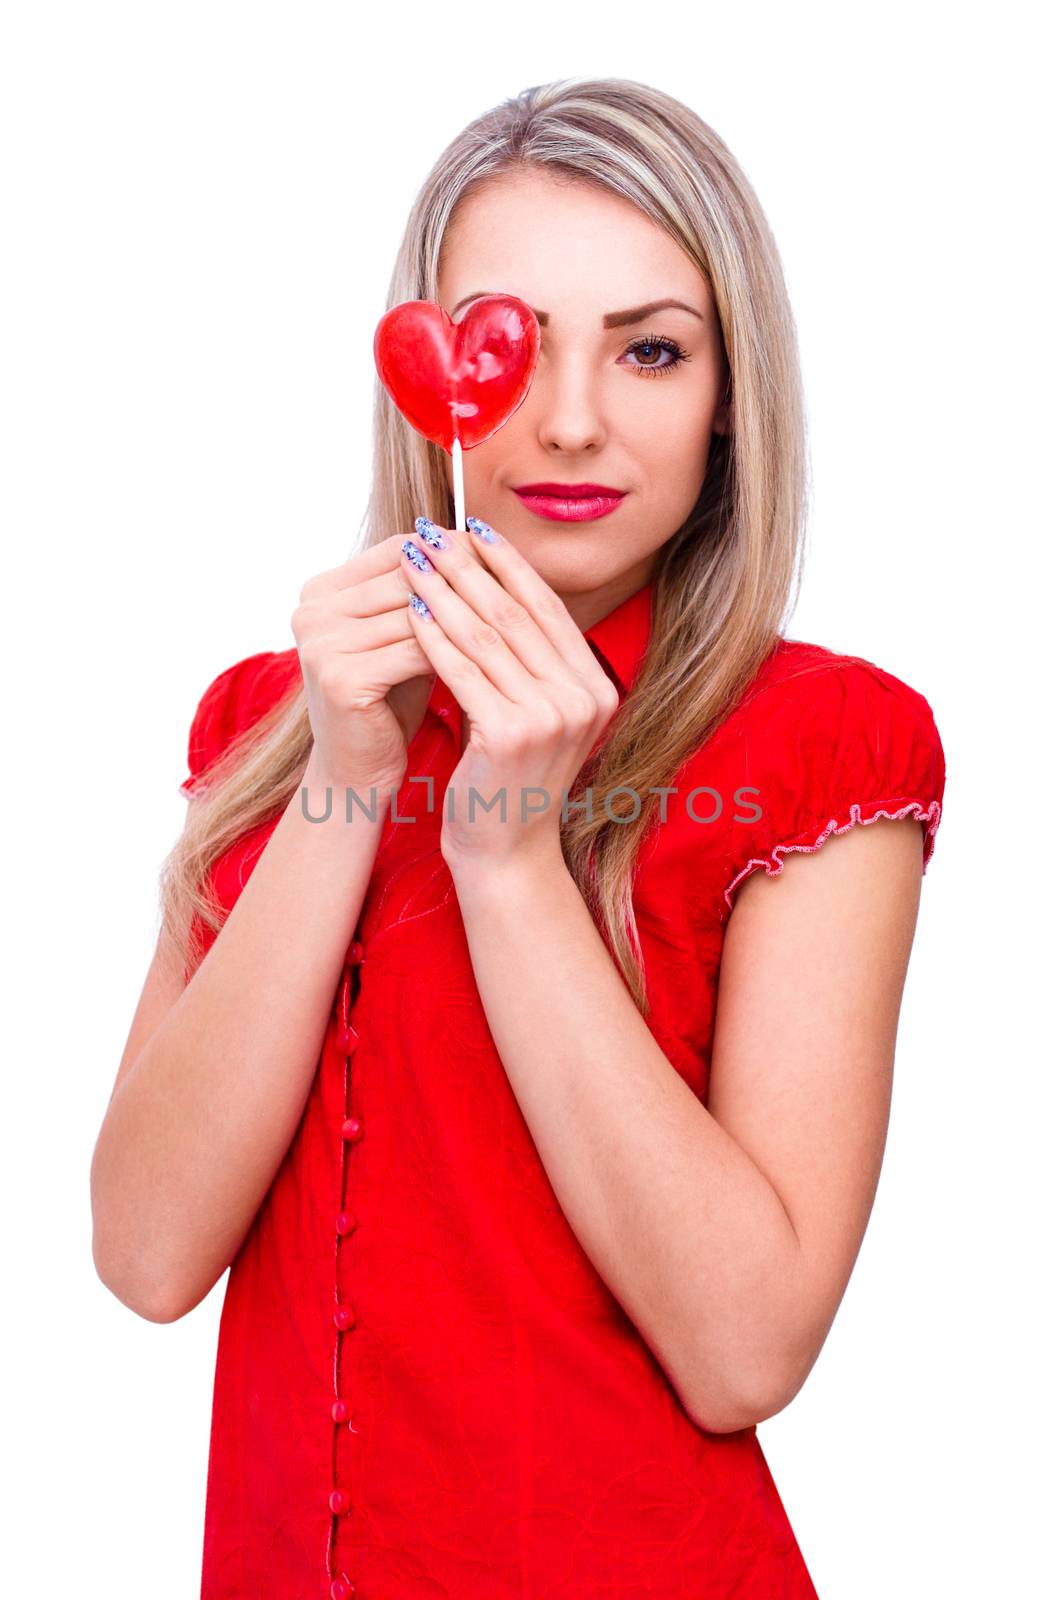 Beautiful young woman holding heart shape lollipop on white
 by id7100